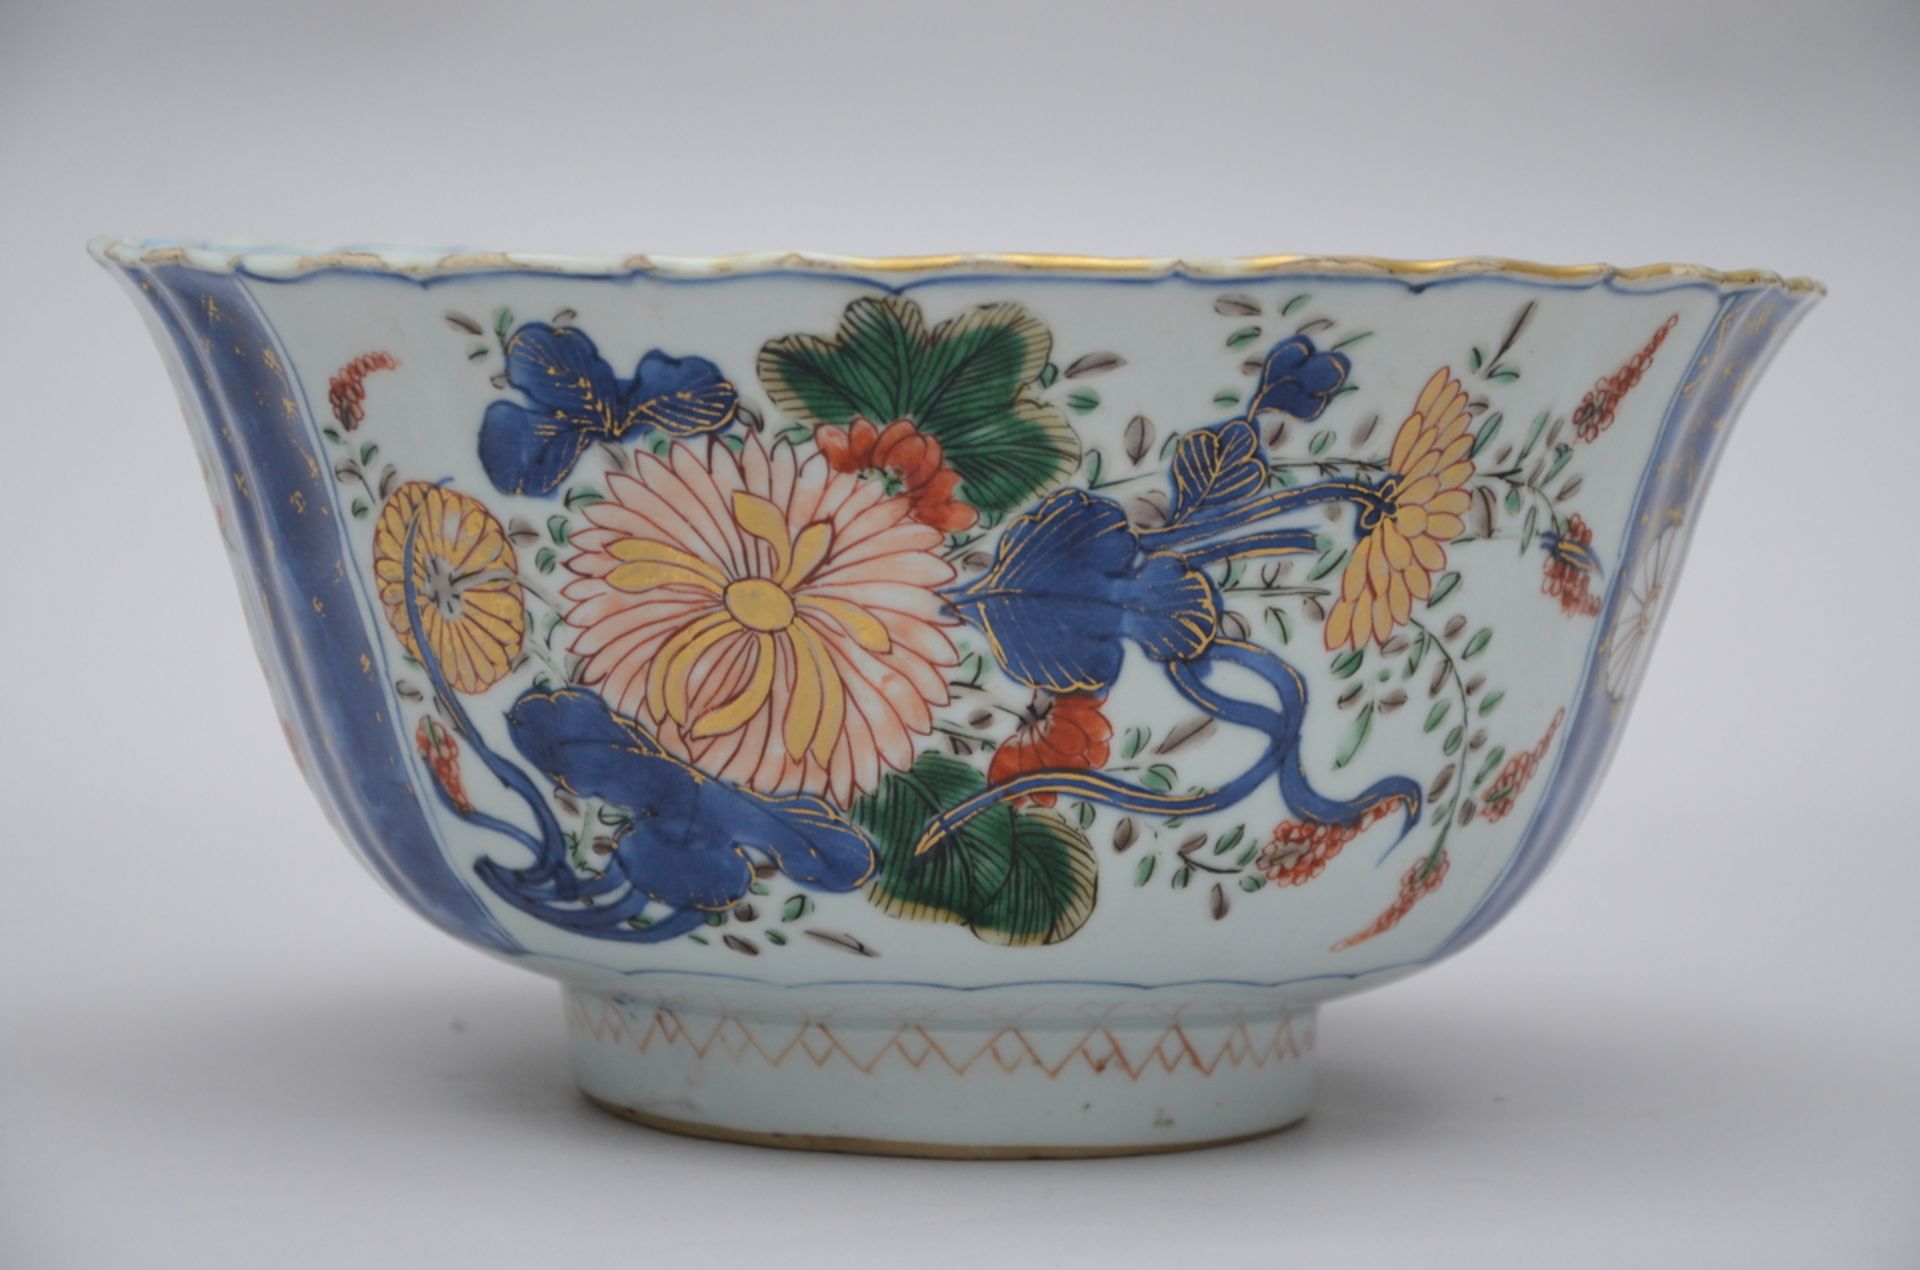 Lobed bowl in Chinese famille verte porcelain, Kangxi period (13x25.5 cm)